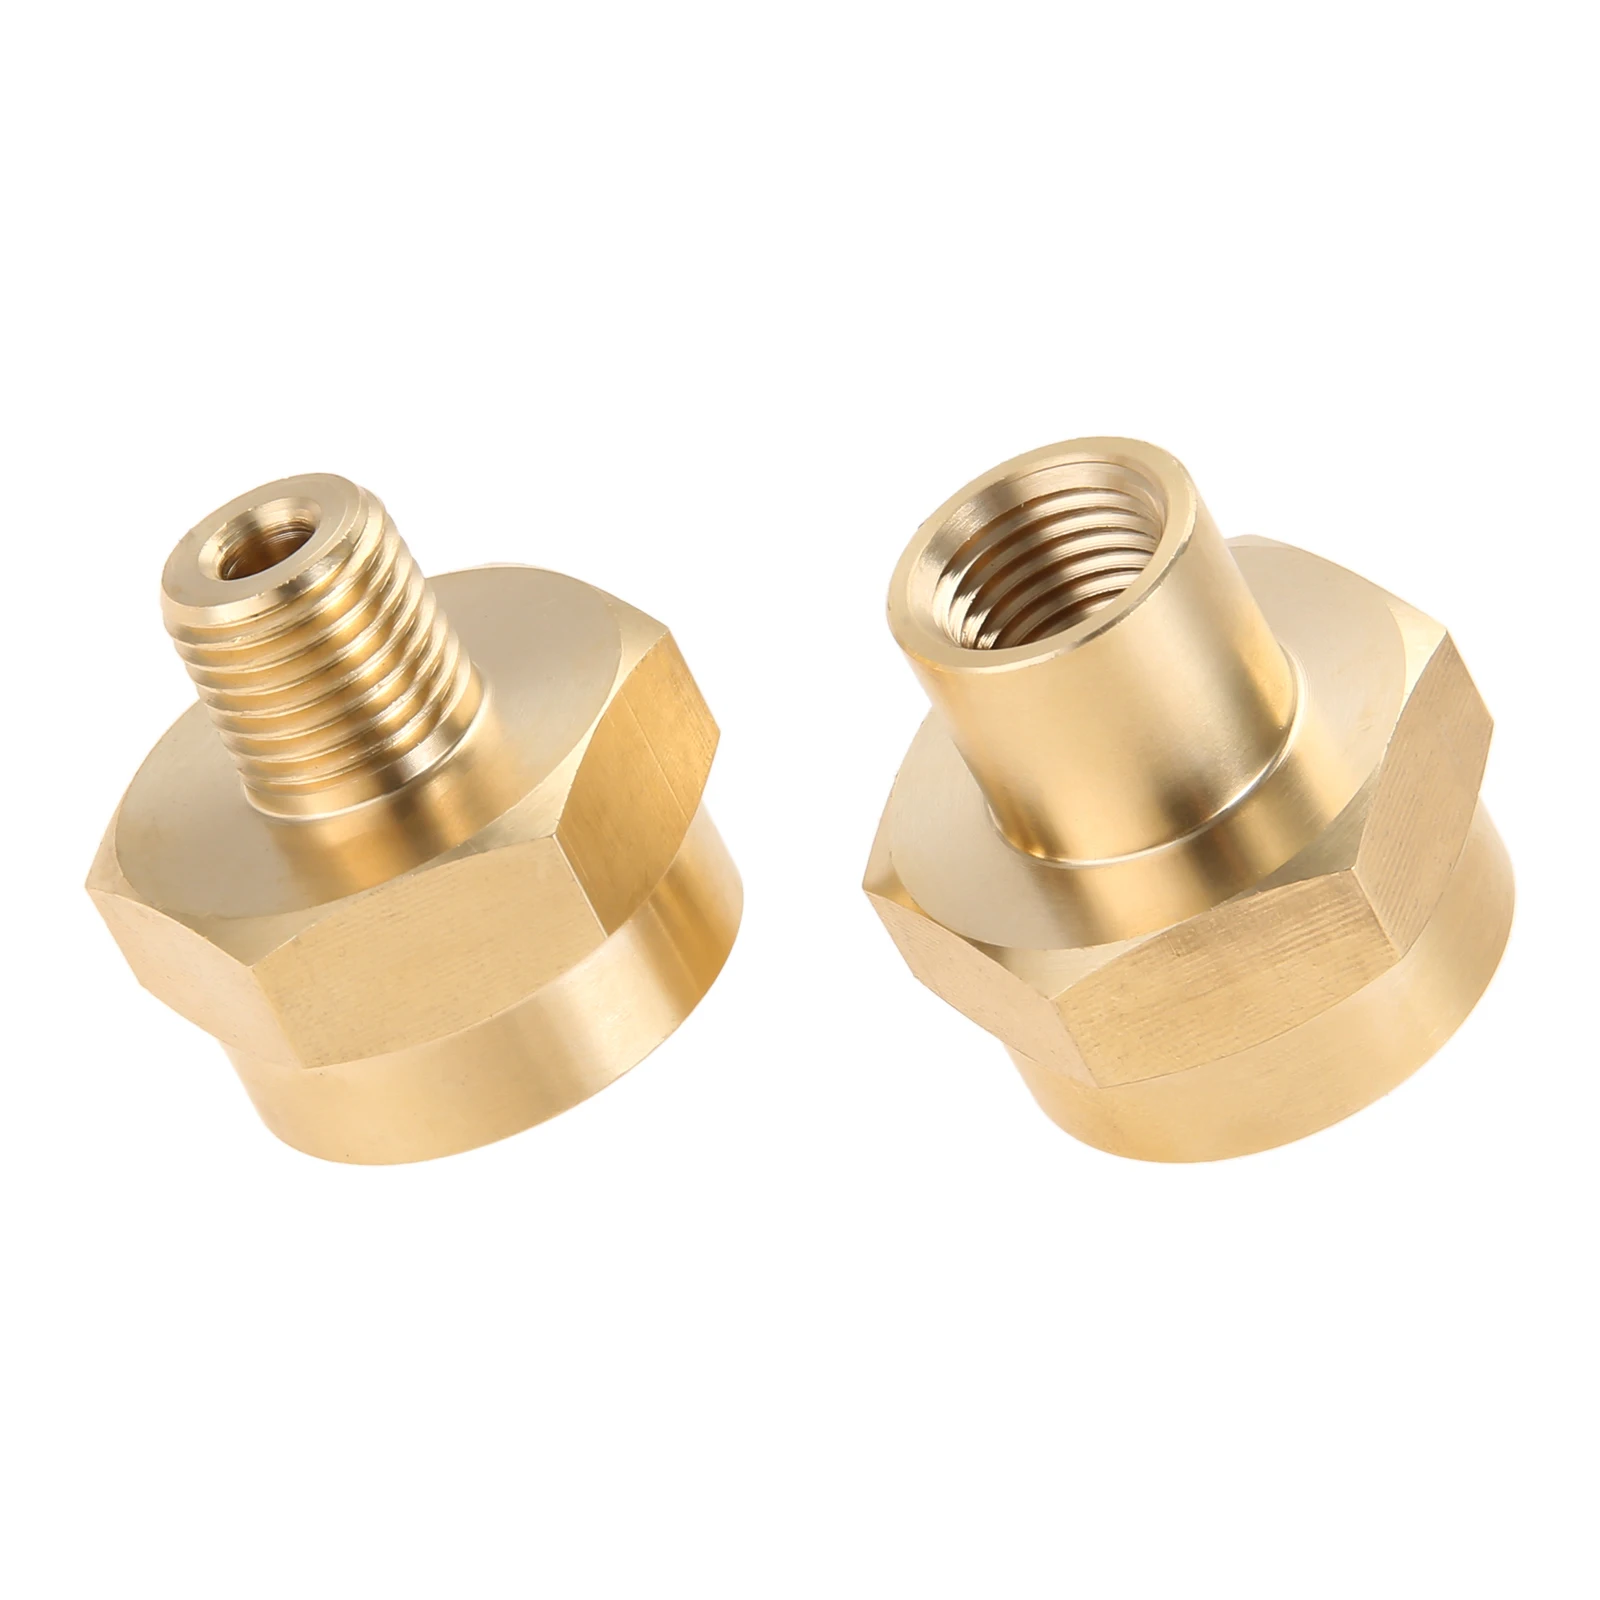 1LB Solid Brass Propane Gas Bottle Refill Adapter Connector 1/4" NPT Thread Kits 